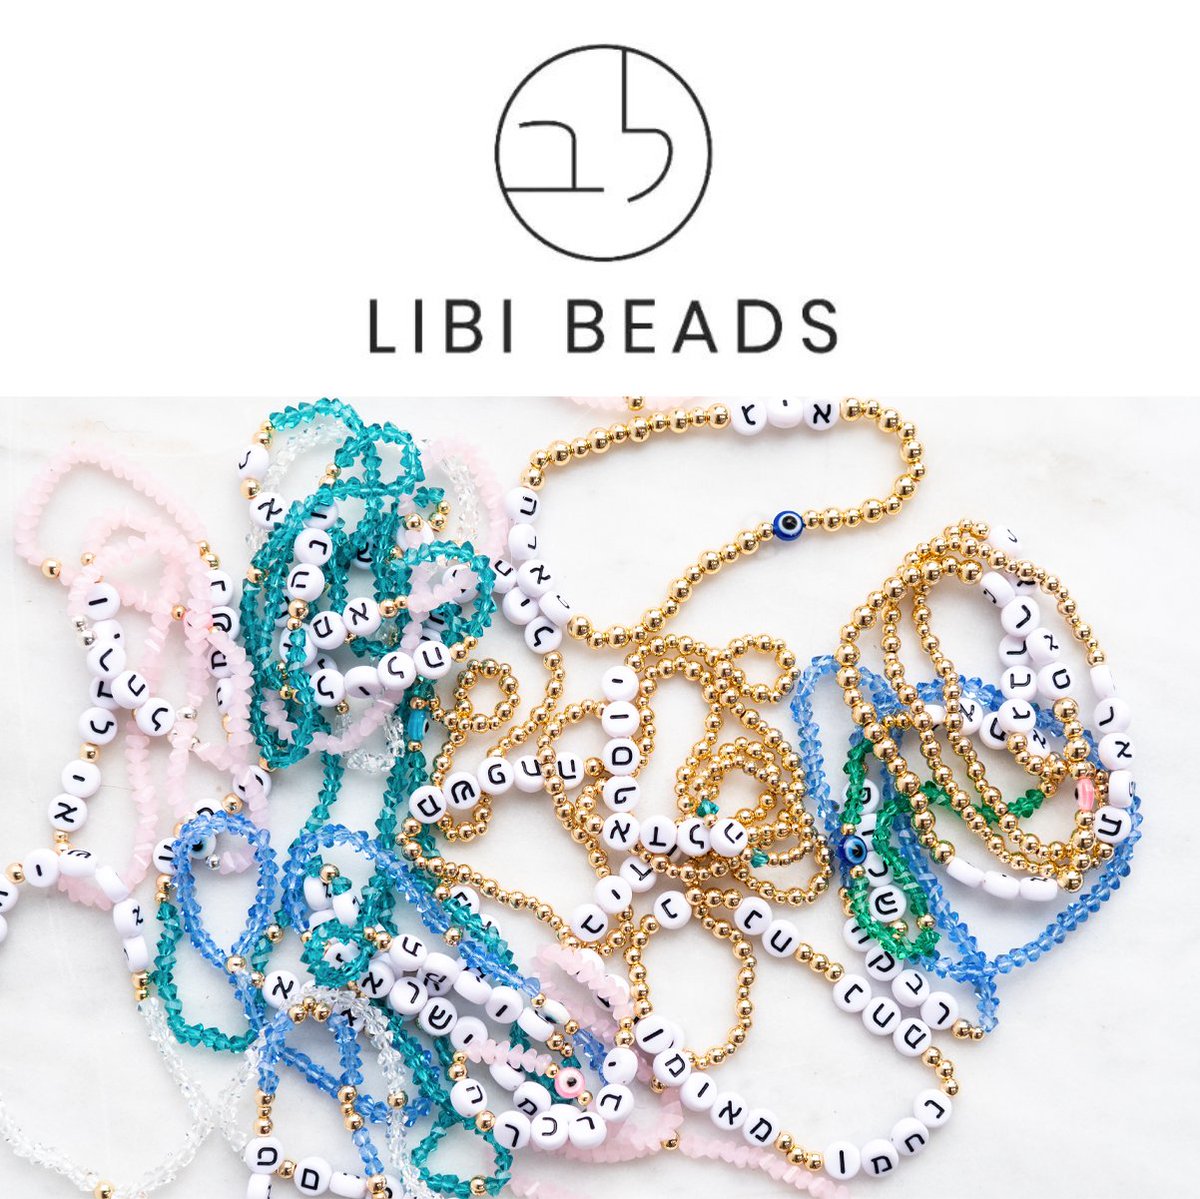 Libi Beads, Bespoke Handmade Jewellery. 

The First Ever Letter Beads in HEBREW.

Follow on Instagram at @Libi.Beads or call 07926 620390

#JLife #Magazine #Manchester #Leeds #Jewishlife #JewishCommunity #LetterBeads #HebrewLetters #BespokeJewellery